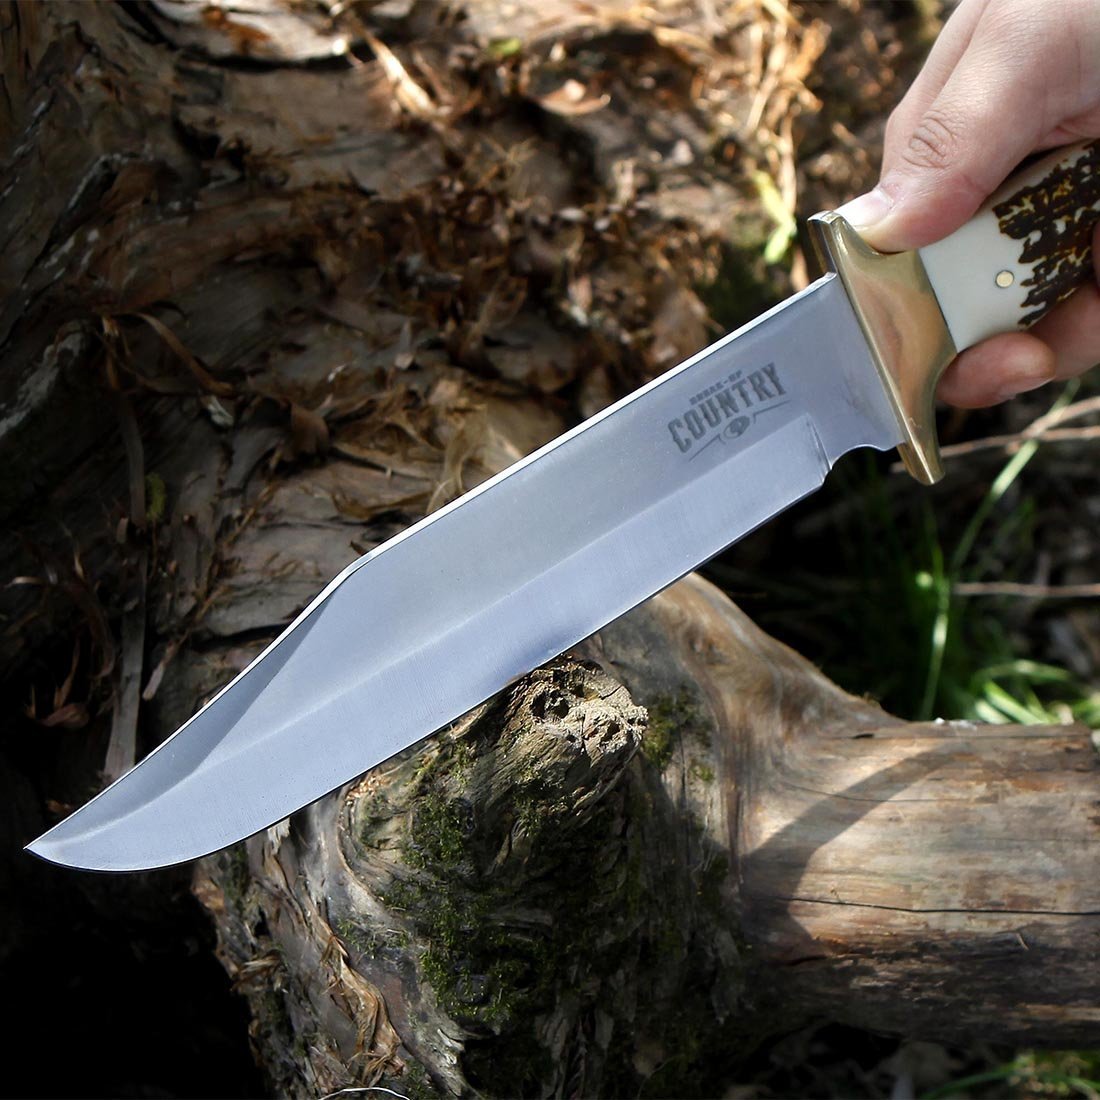 MOSSY OAK 14-inch Bowie Knife Stainless Steel Fixed Blade Full Tang Handle with Leather Sheath - $23.95